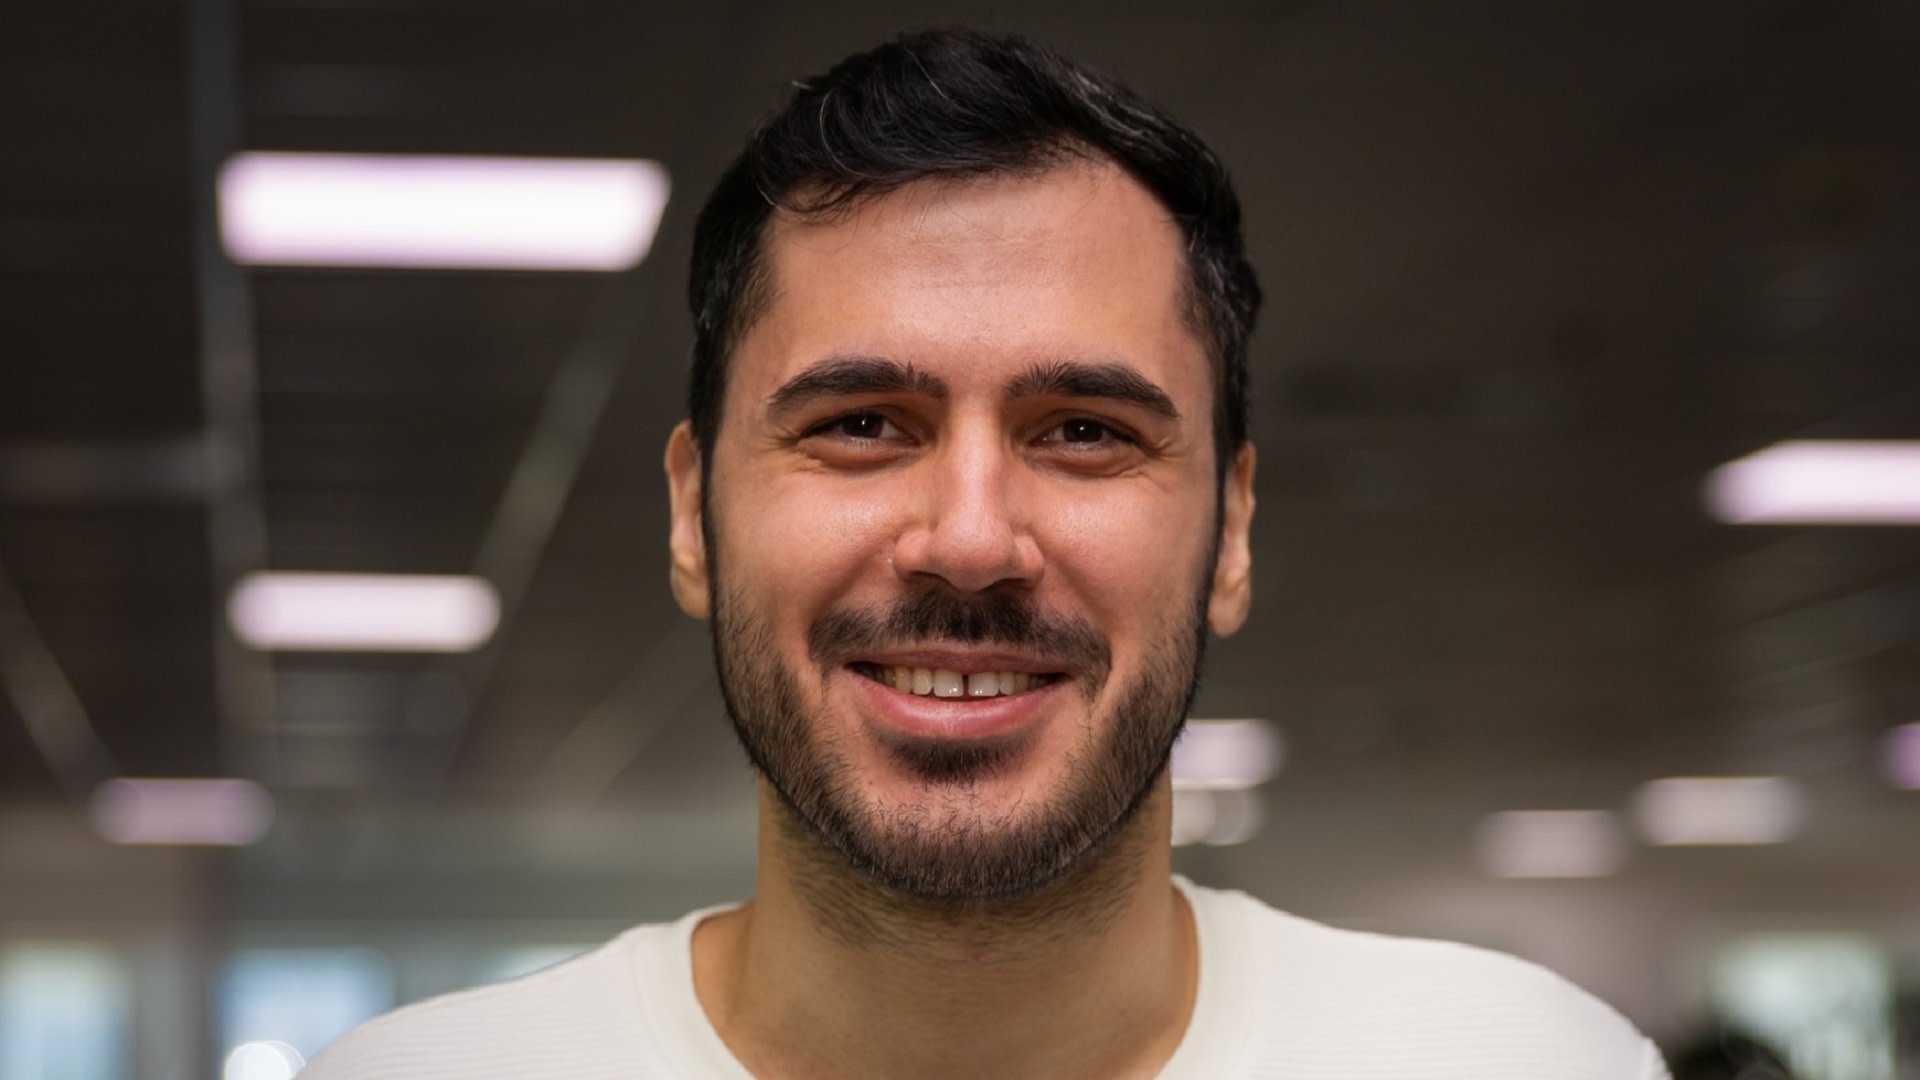 Alexandru's journey: from Game Tester to IT teams